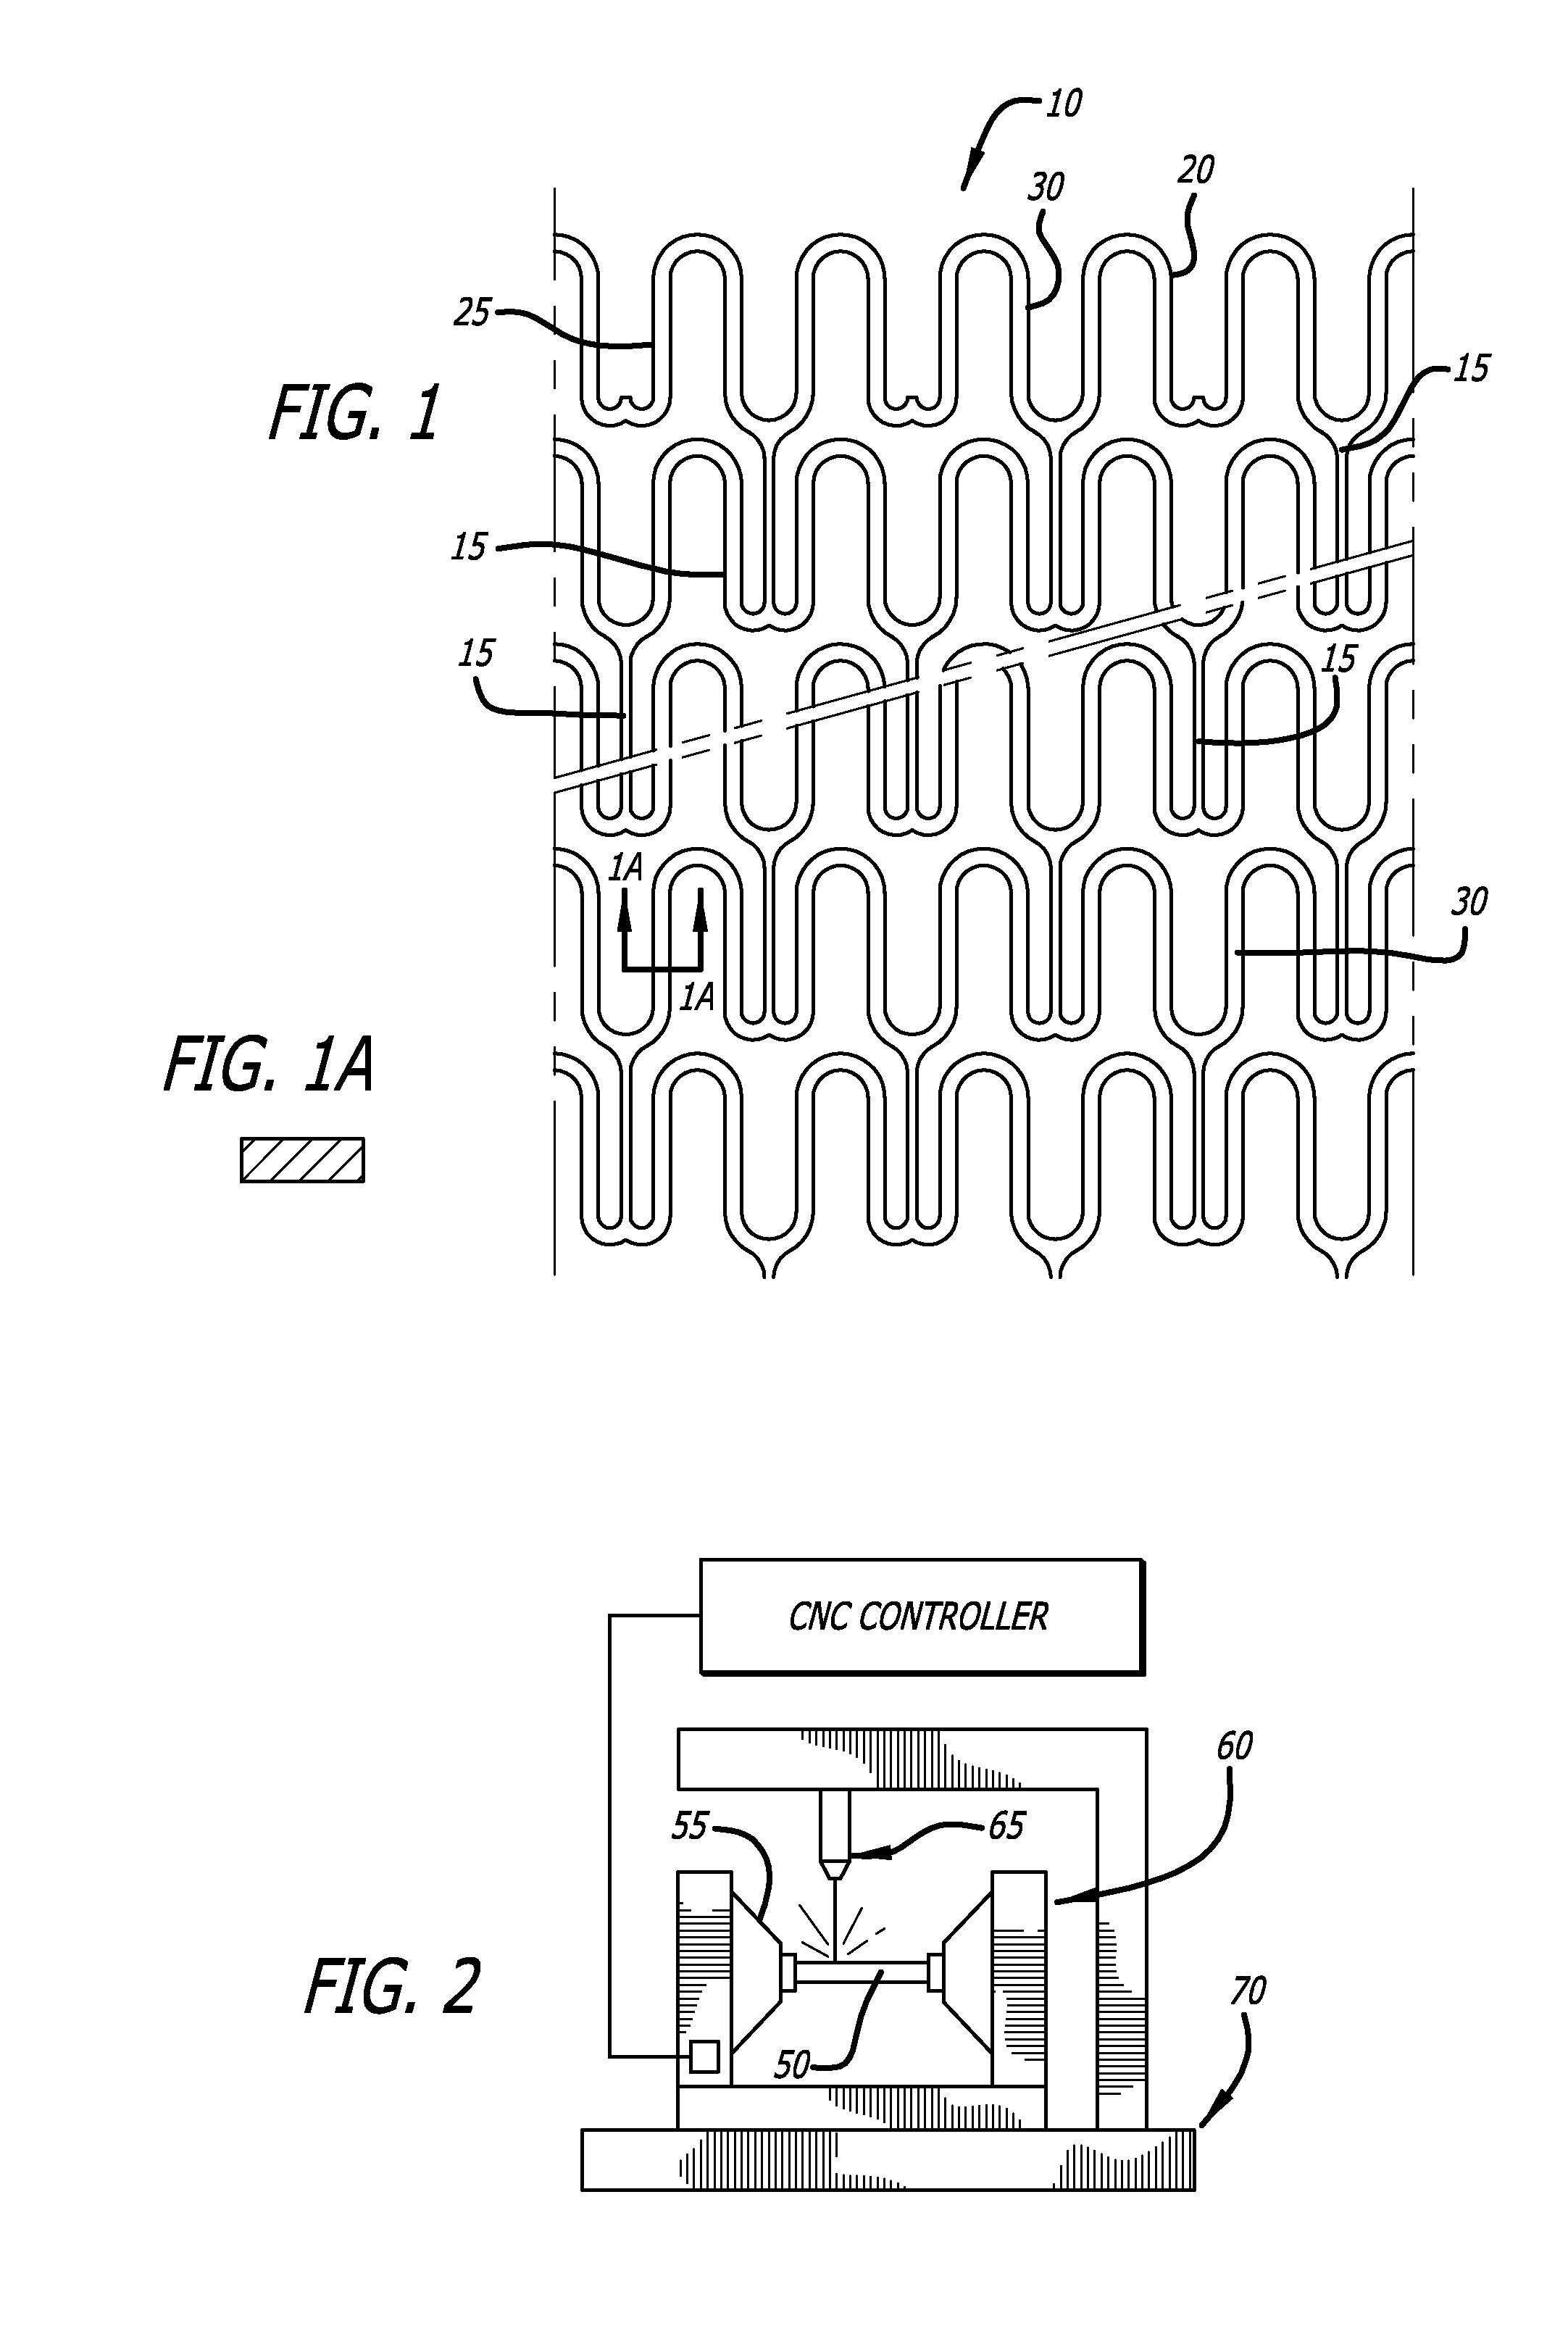 Laser optics with lateral and angular shift compensation